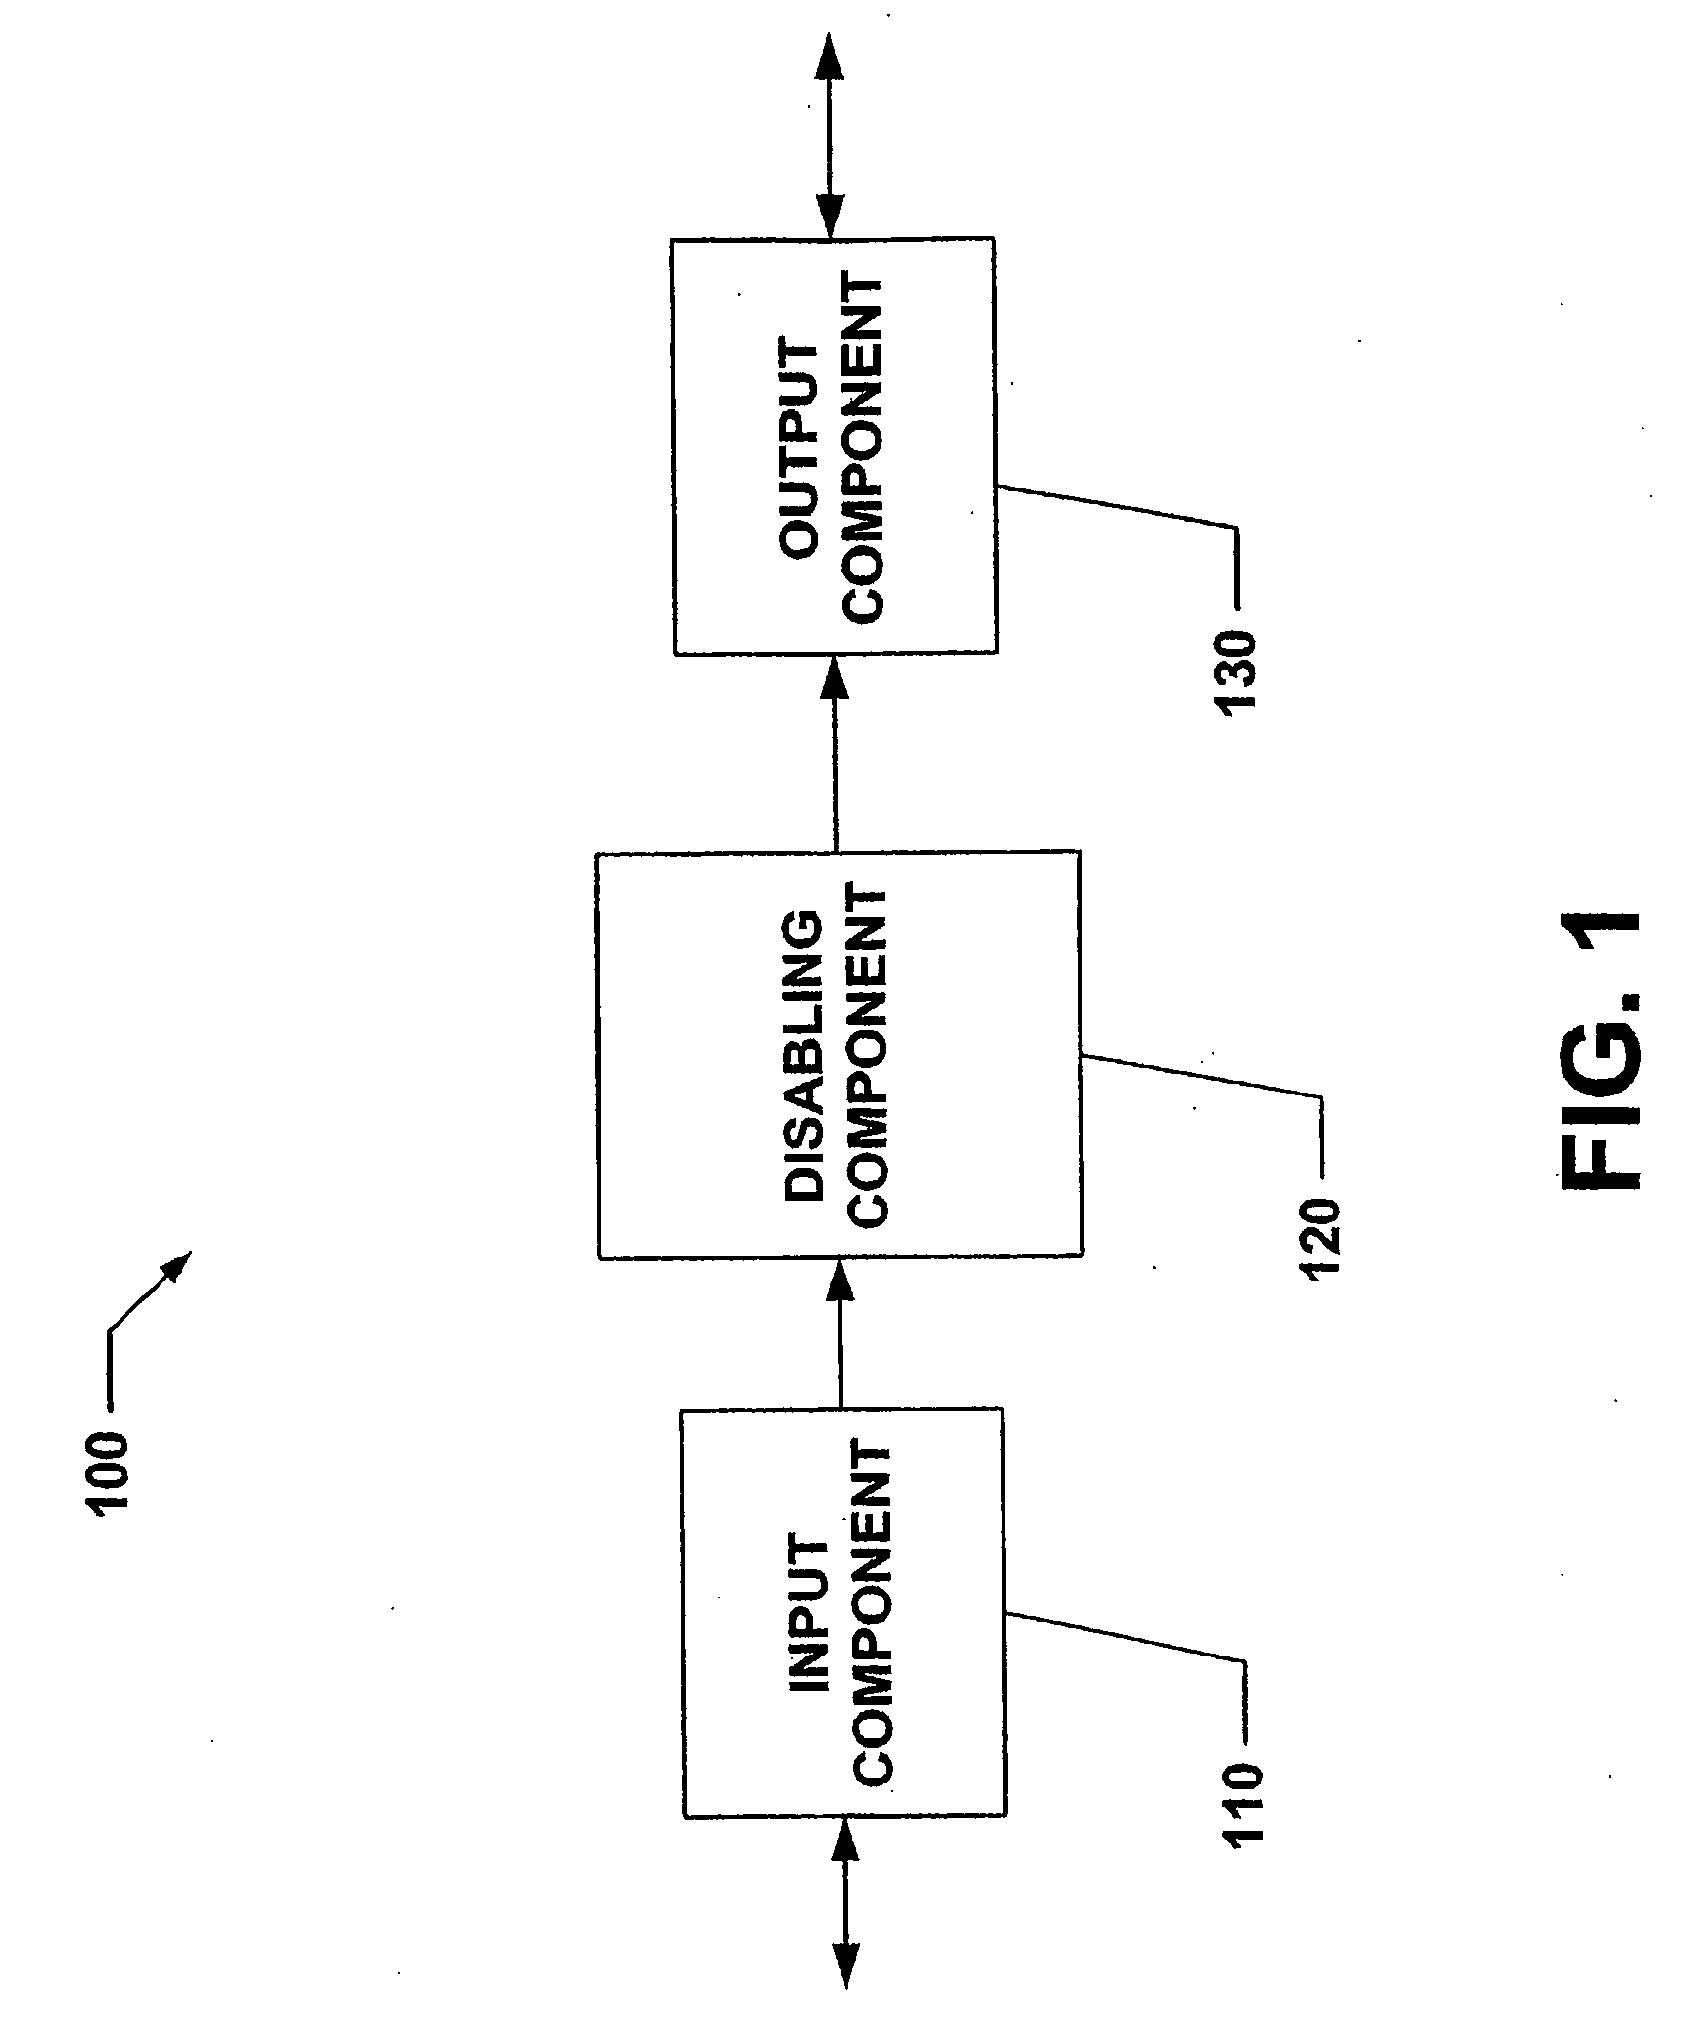 System and Method for Limiting Mobile Device Functionality.